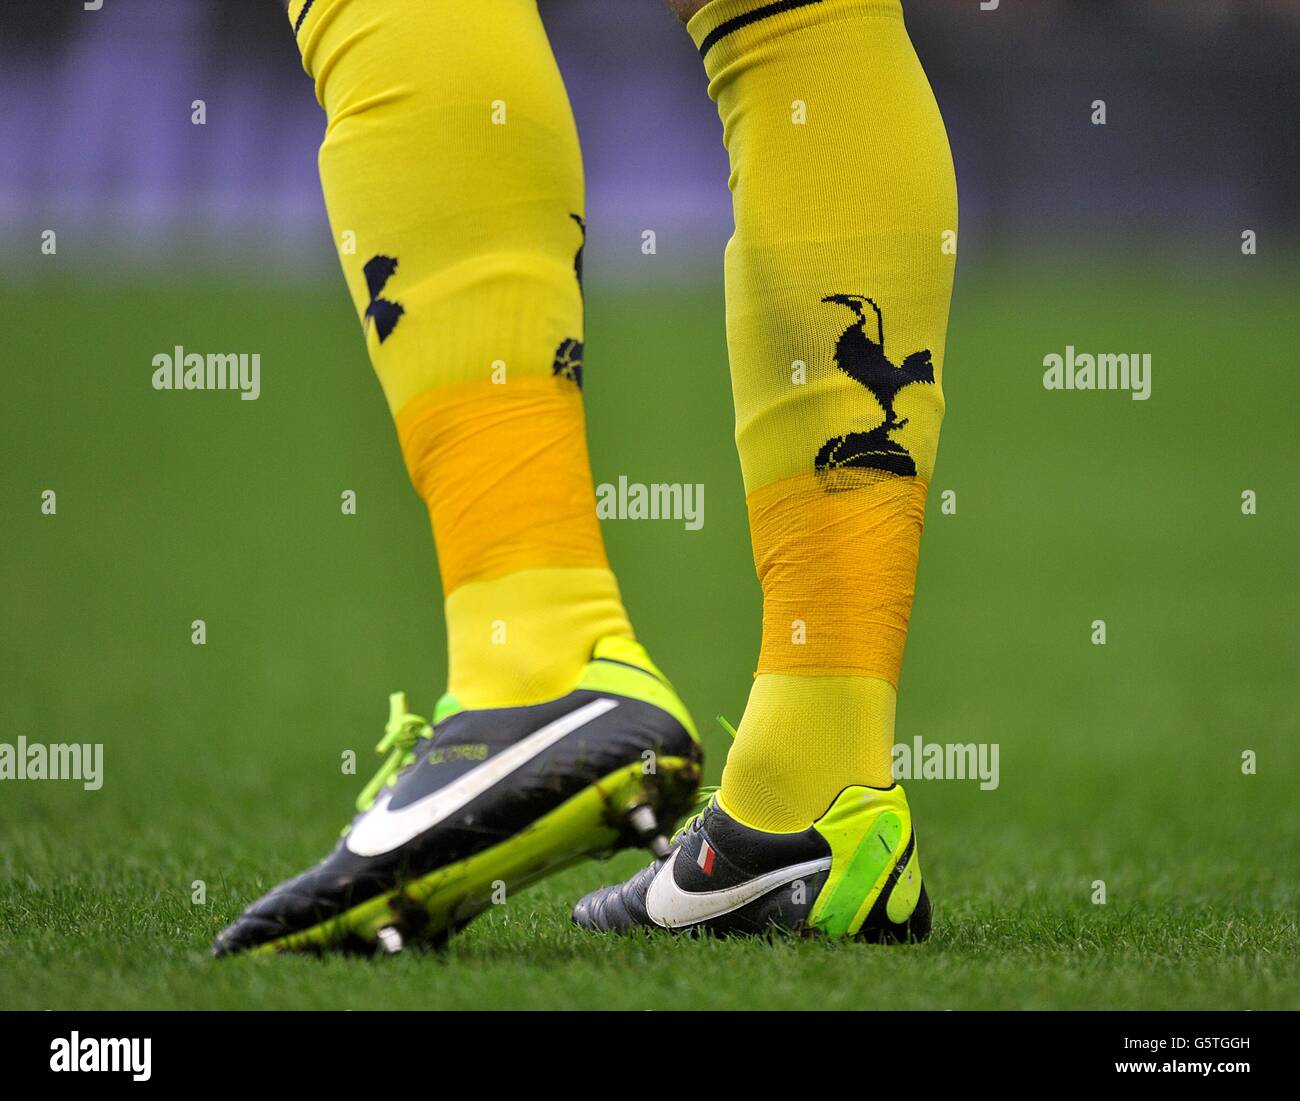 General view of a Tottenham Hotspur players socks and boots during the match Stock Photo